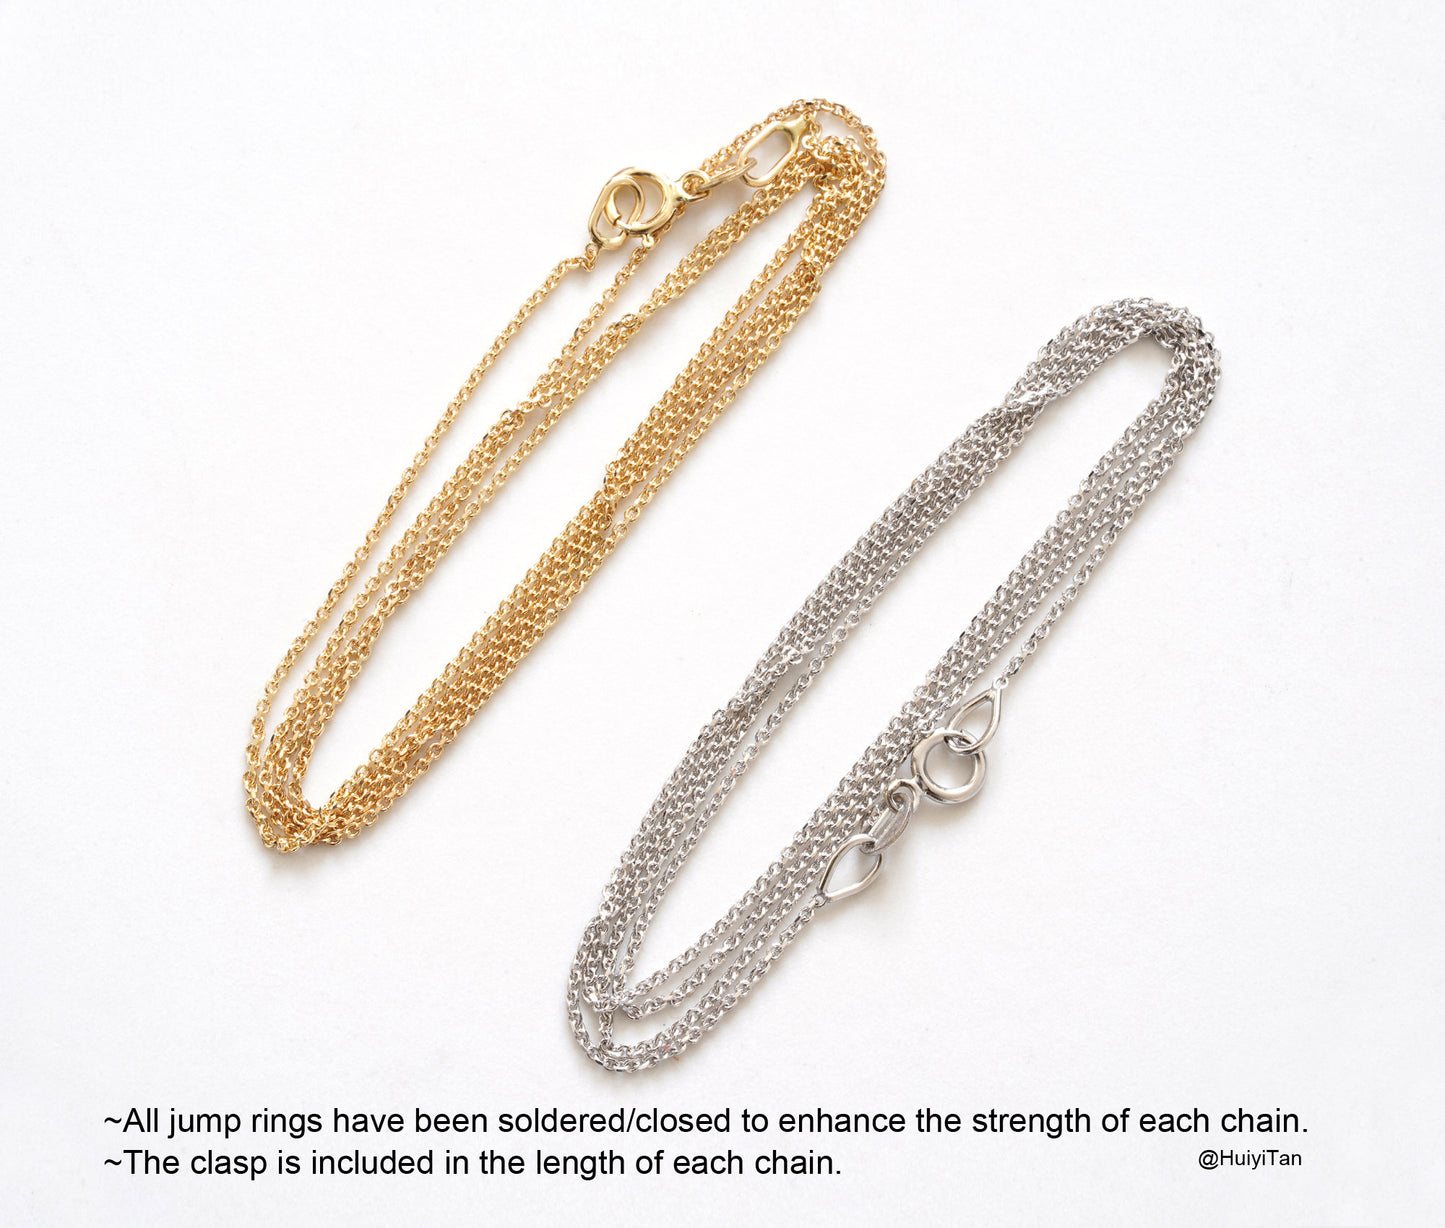 Cable Chain in 14ct Yellow Gold, 14ct White Gold Chain, DIY Chain Necklace